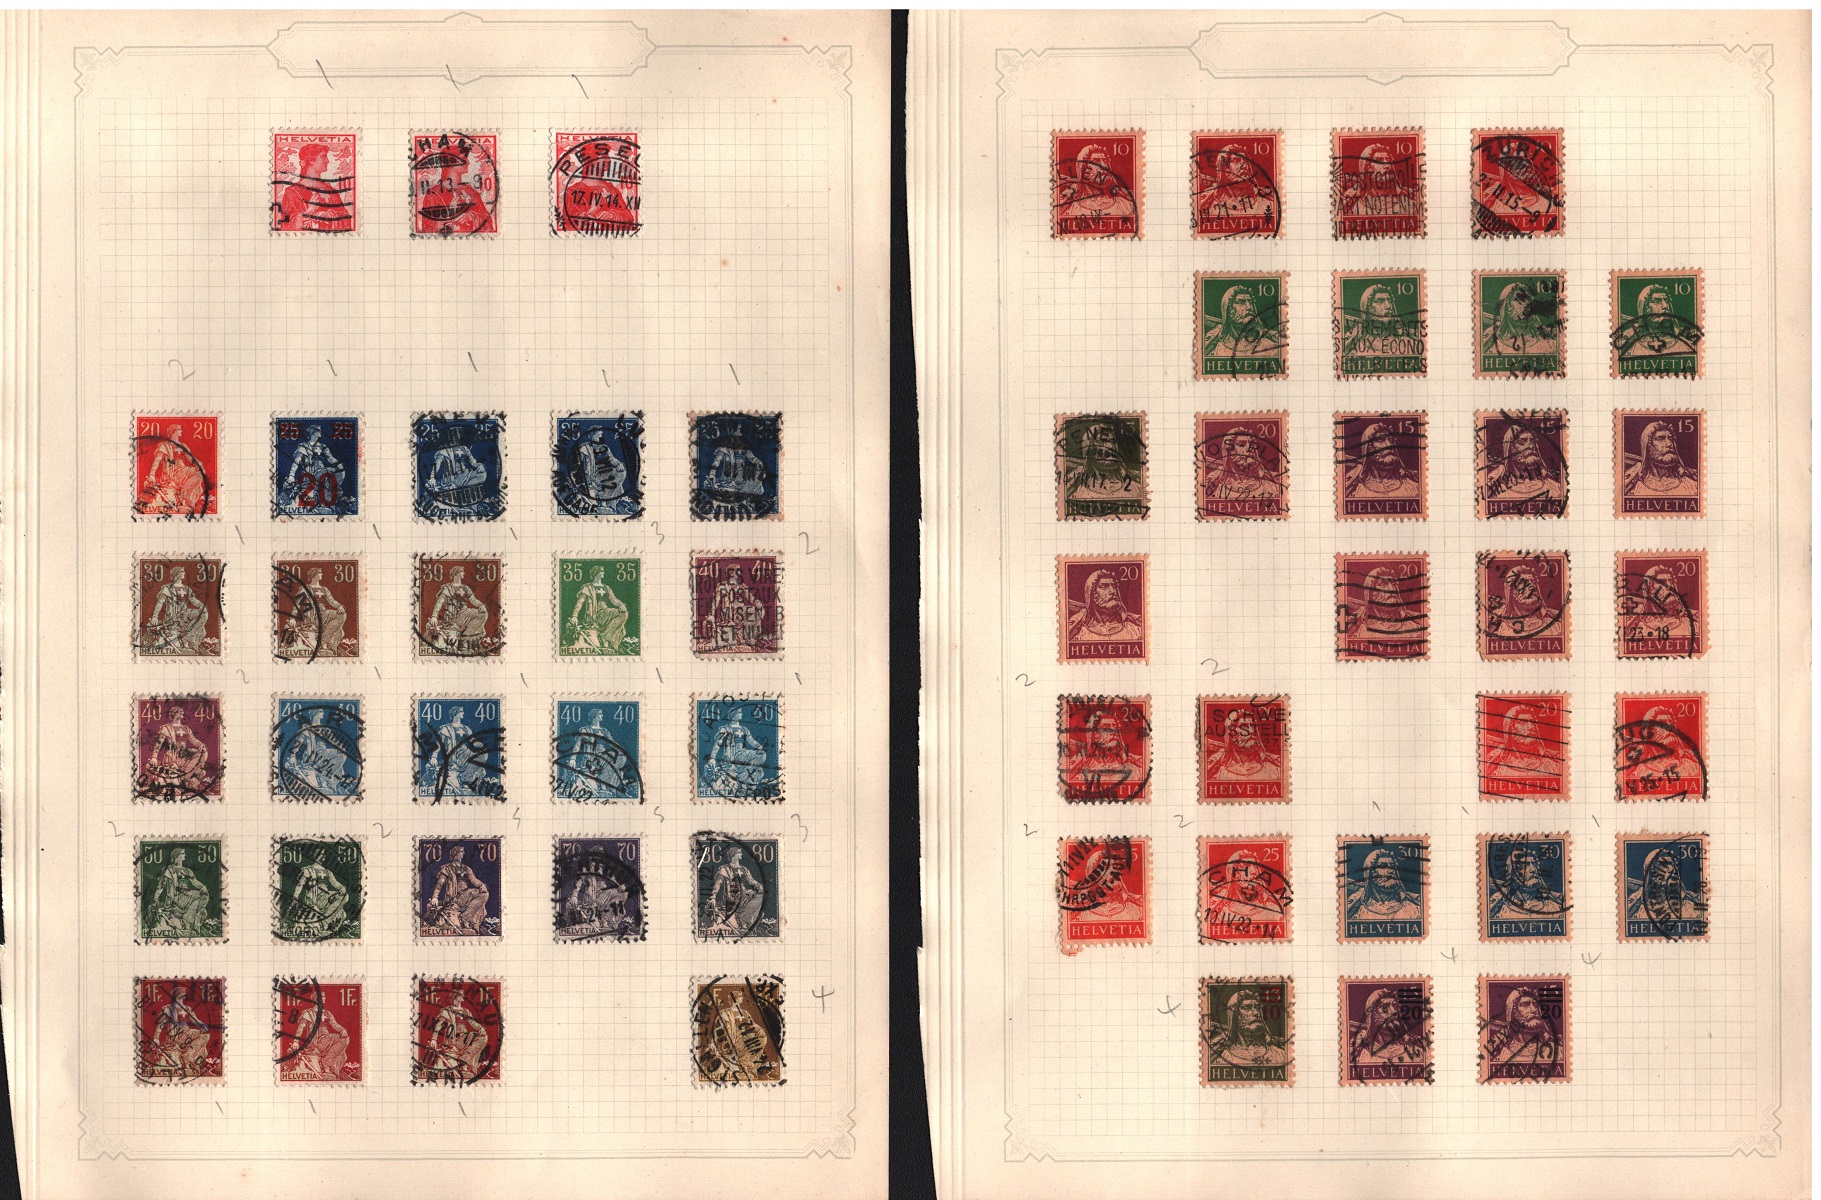 Swiss stamp collection on 4 loose pages. Good condition. We combine postage on multiple winning lots